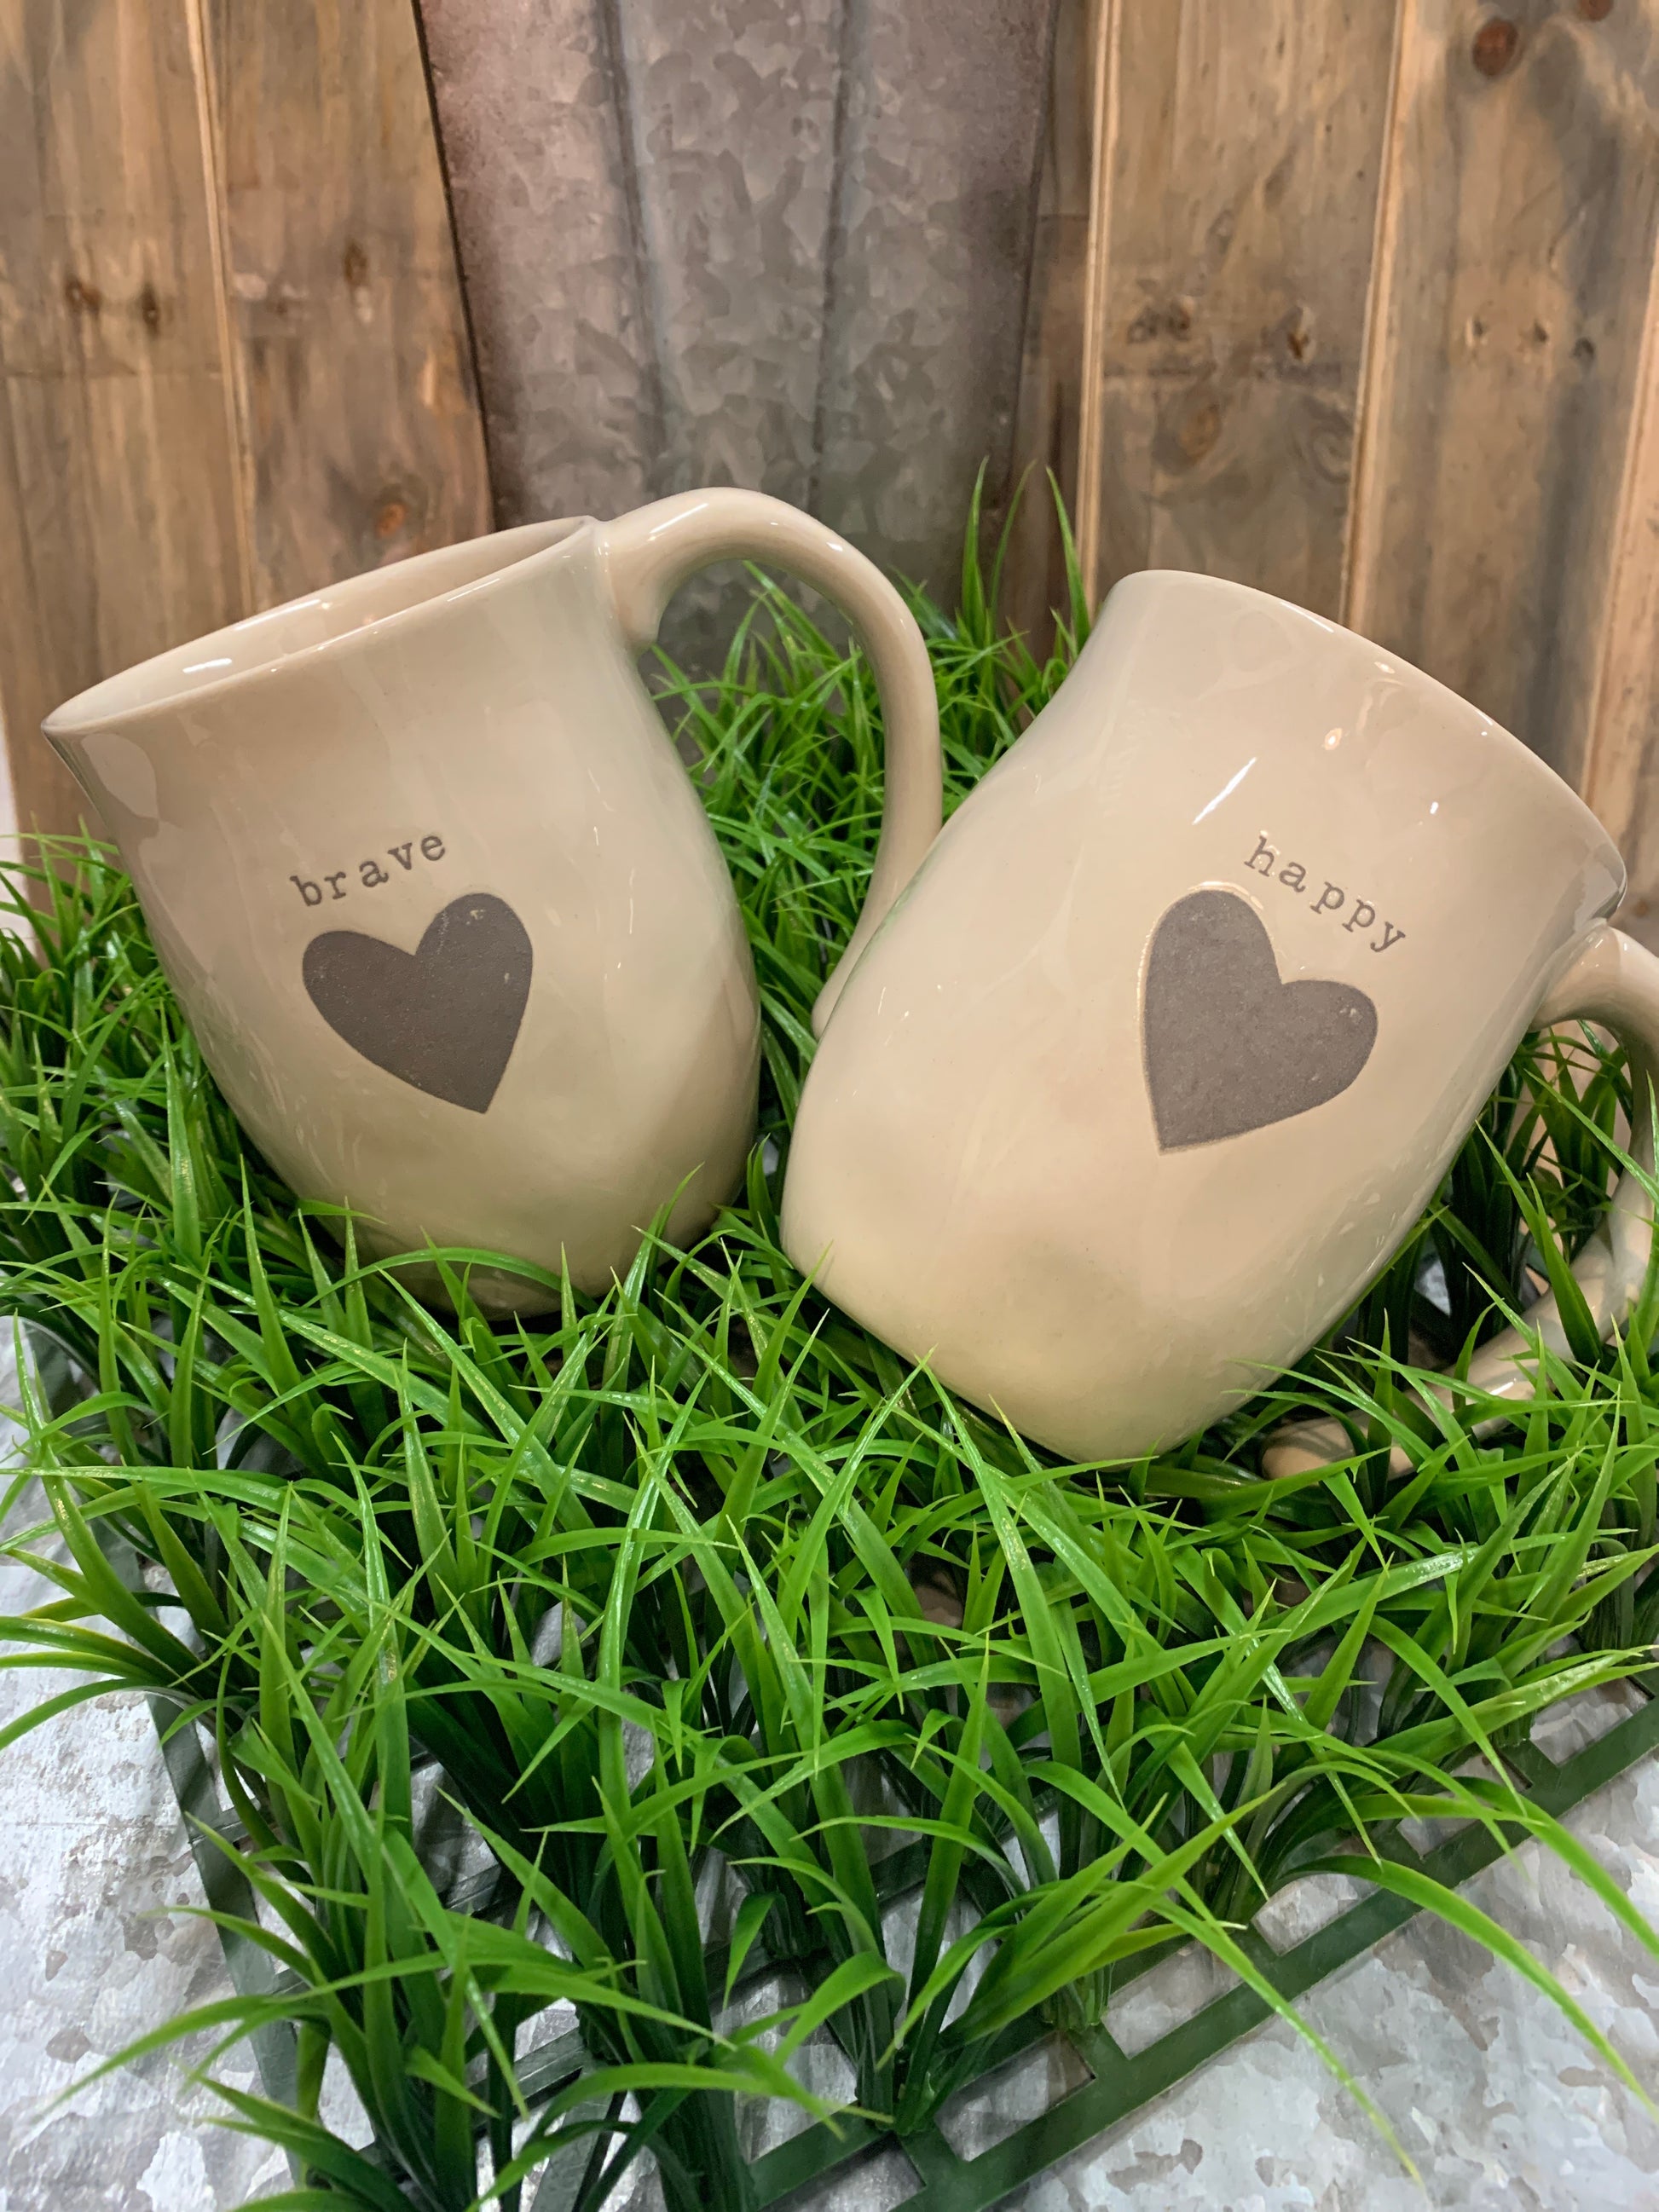 Holding a hot beverage in both hands is a ritual of calm. It gives one time to relax, reflect and think of the uplifting and memorable experiences in life. These Heart Mugs provide their owner with cozy reflection time and calm.